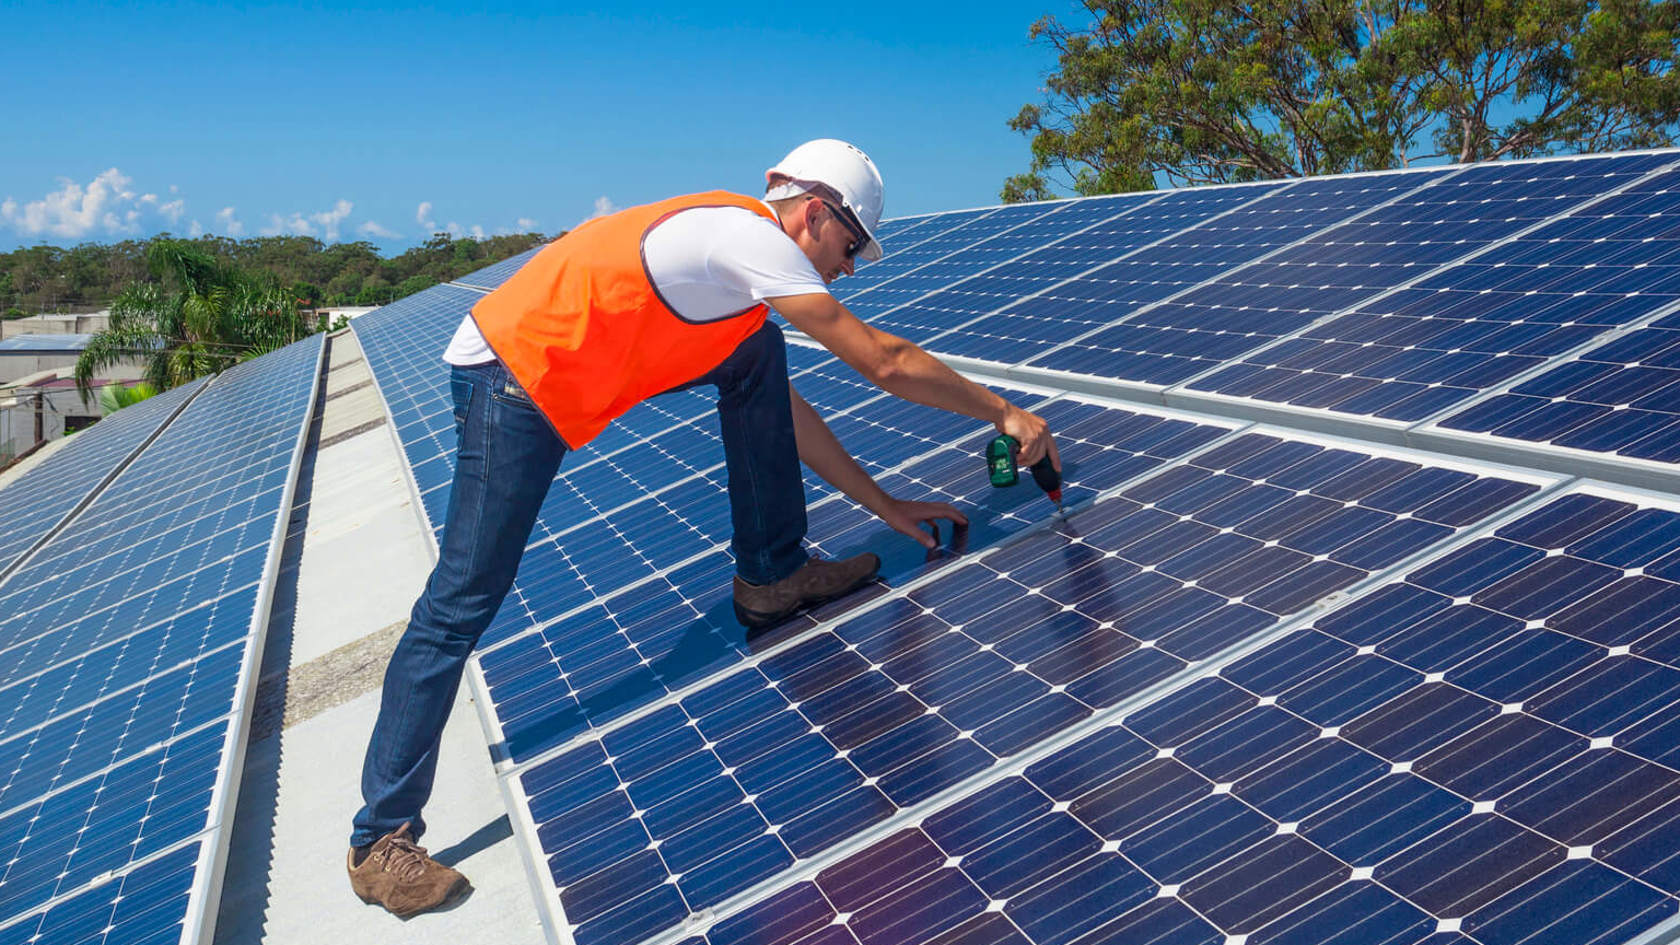 A tradesperson installs solar panels on a large roof.